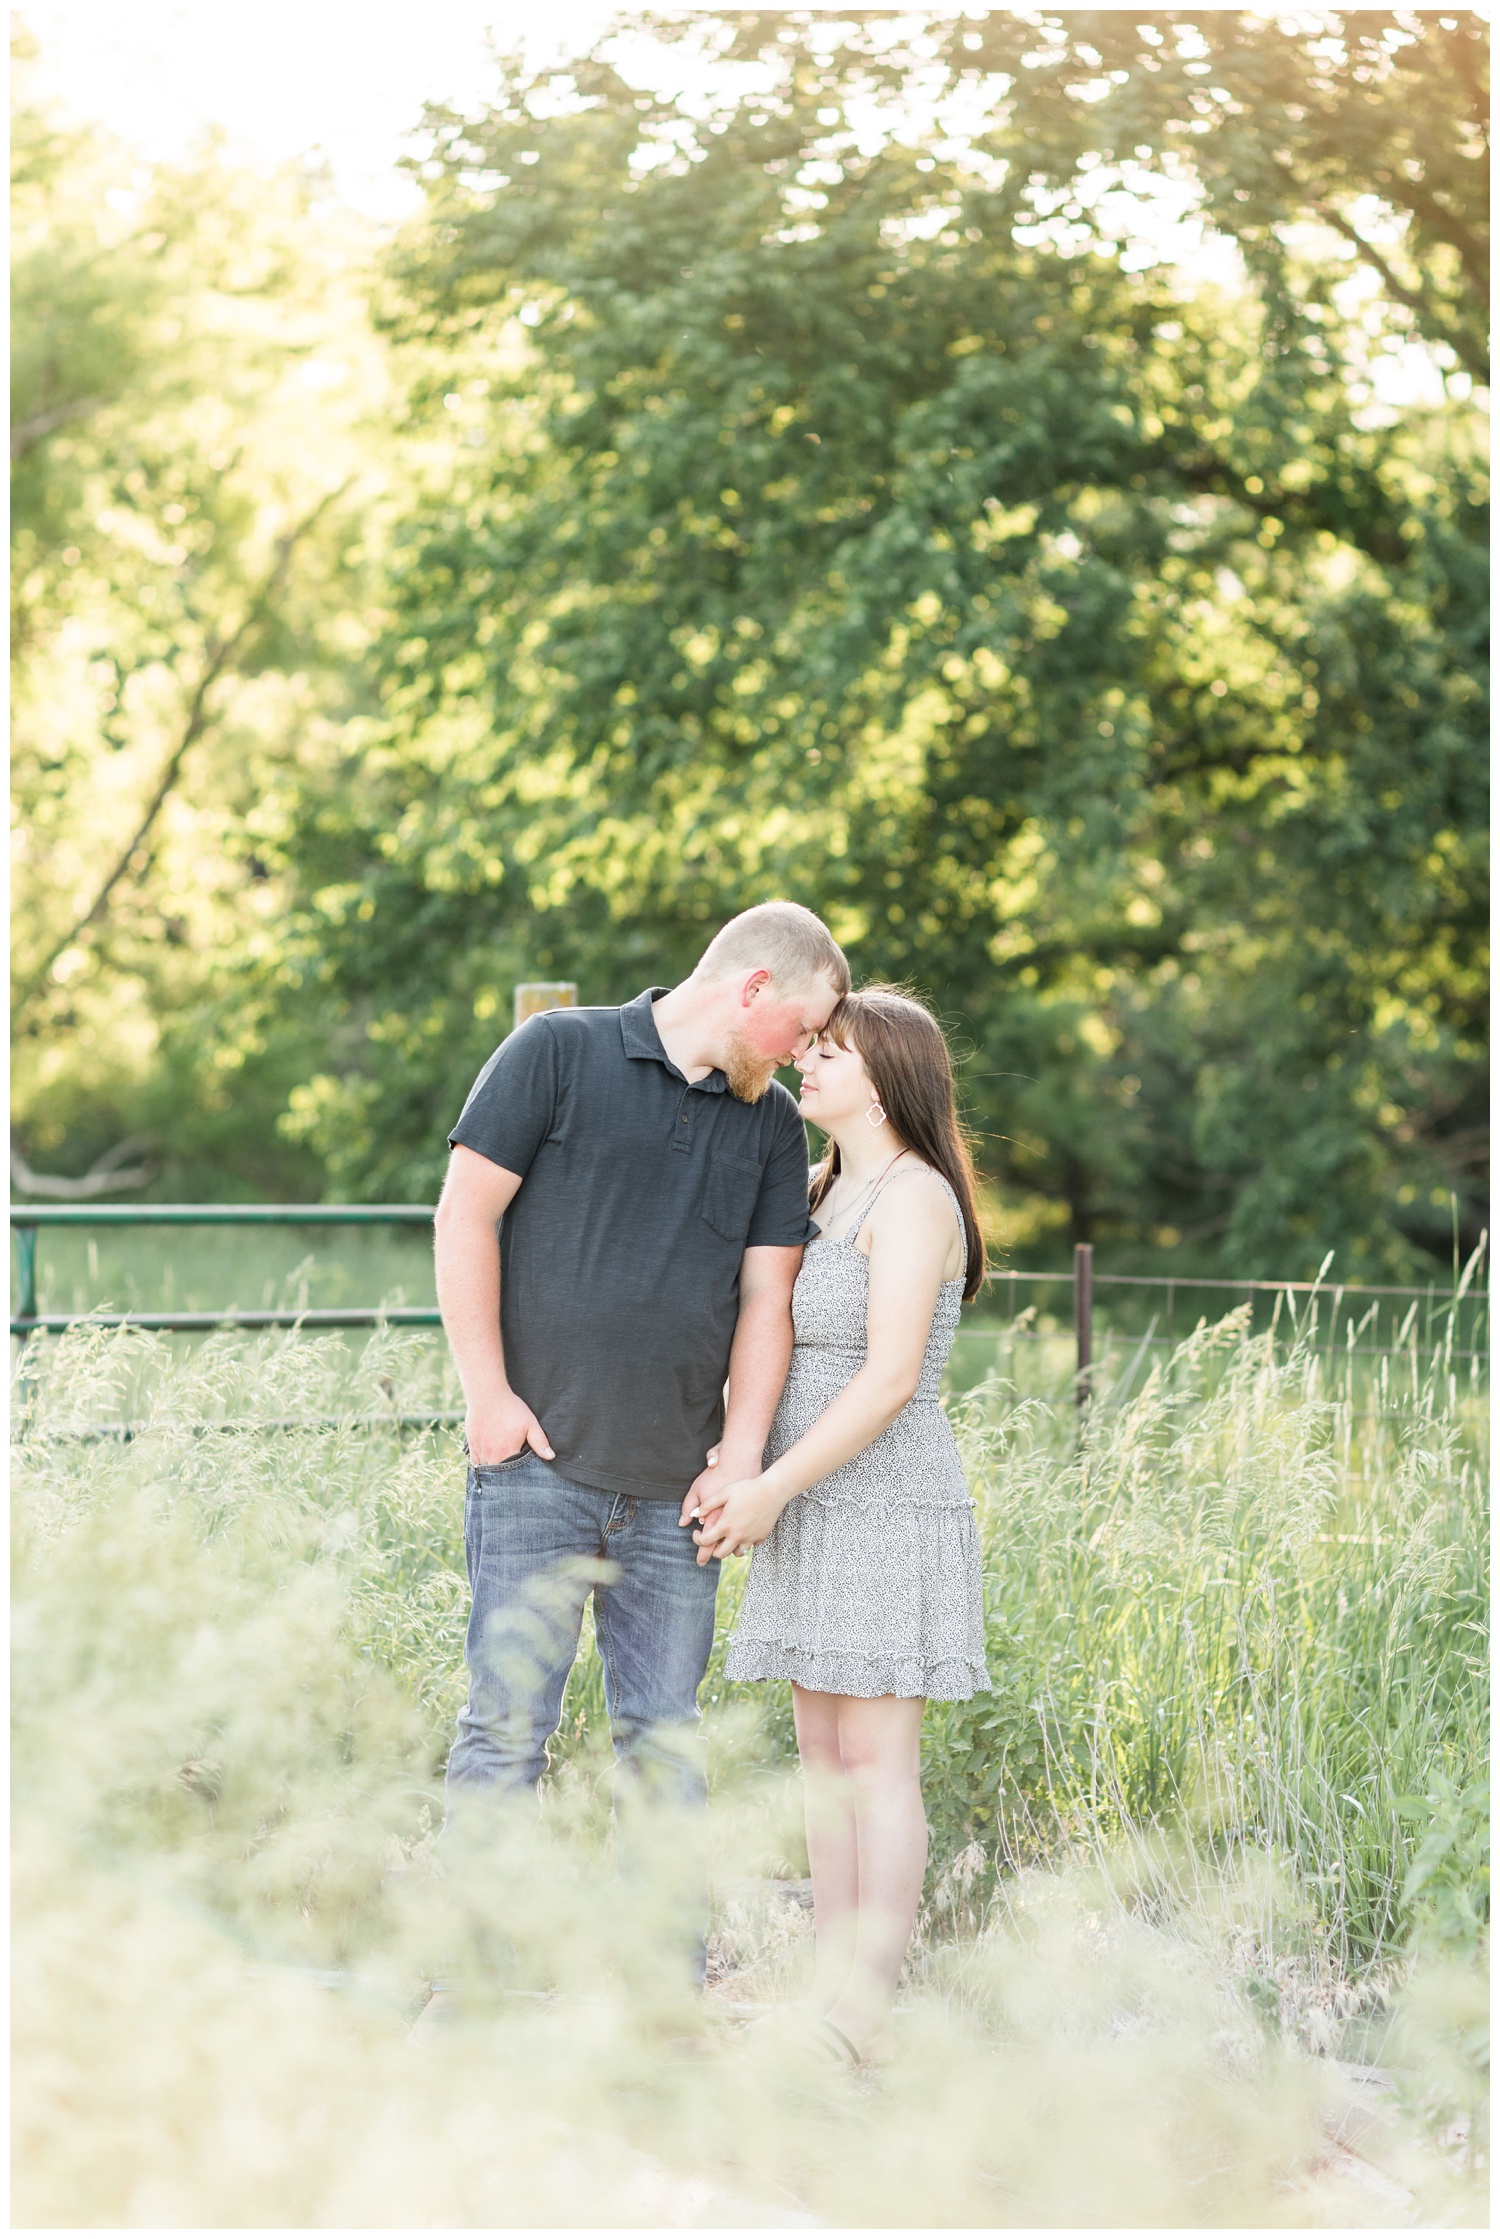 Jeremiah and Madeline embrace in a grassy pasture in Iowa | CB Studio